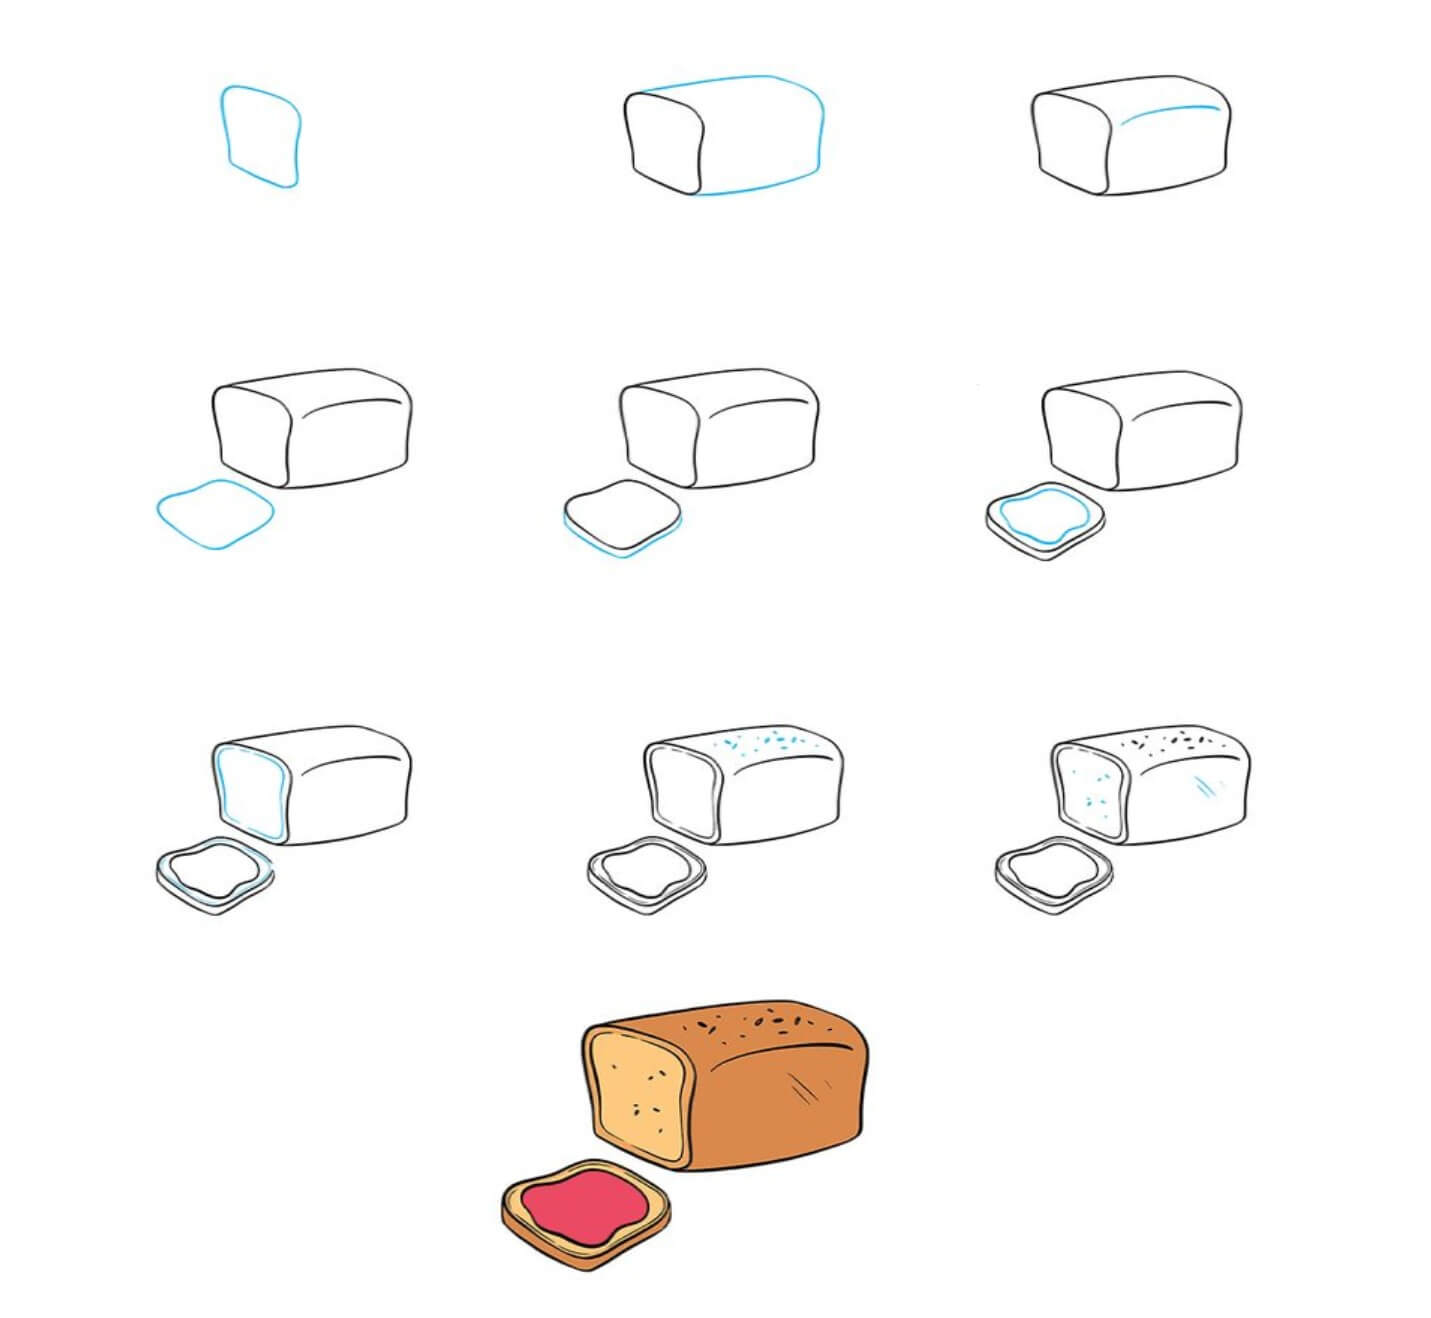 How to draw Sweet bread